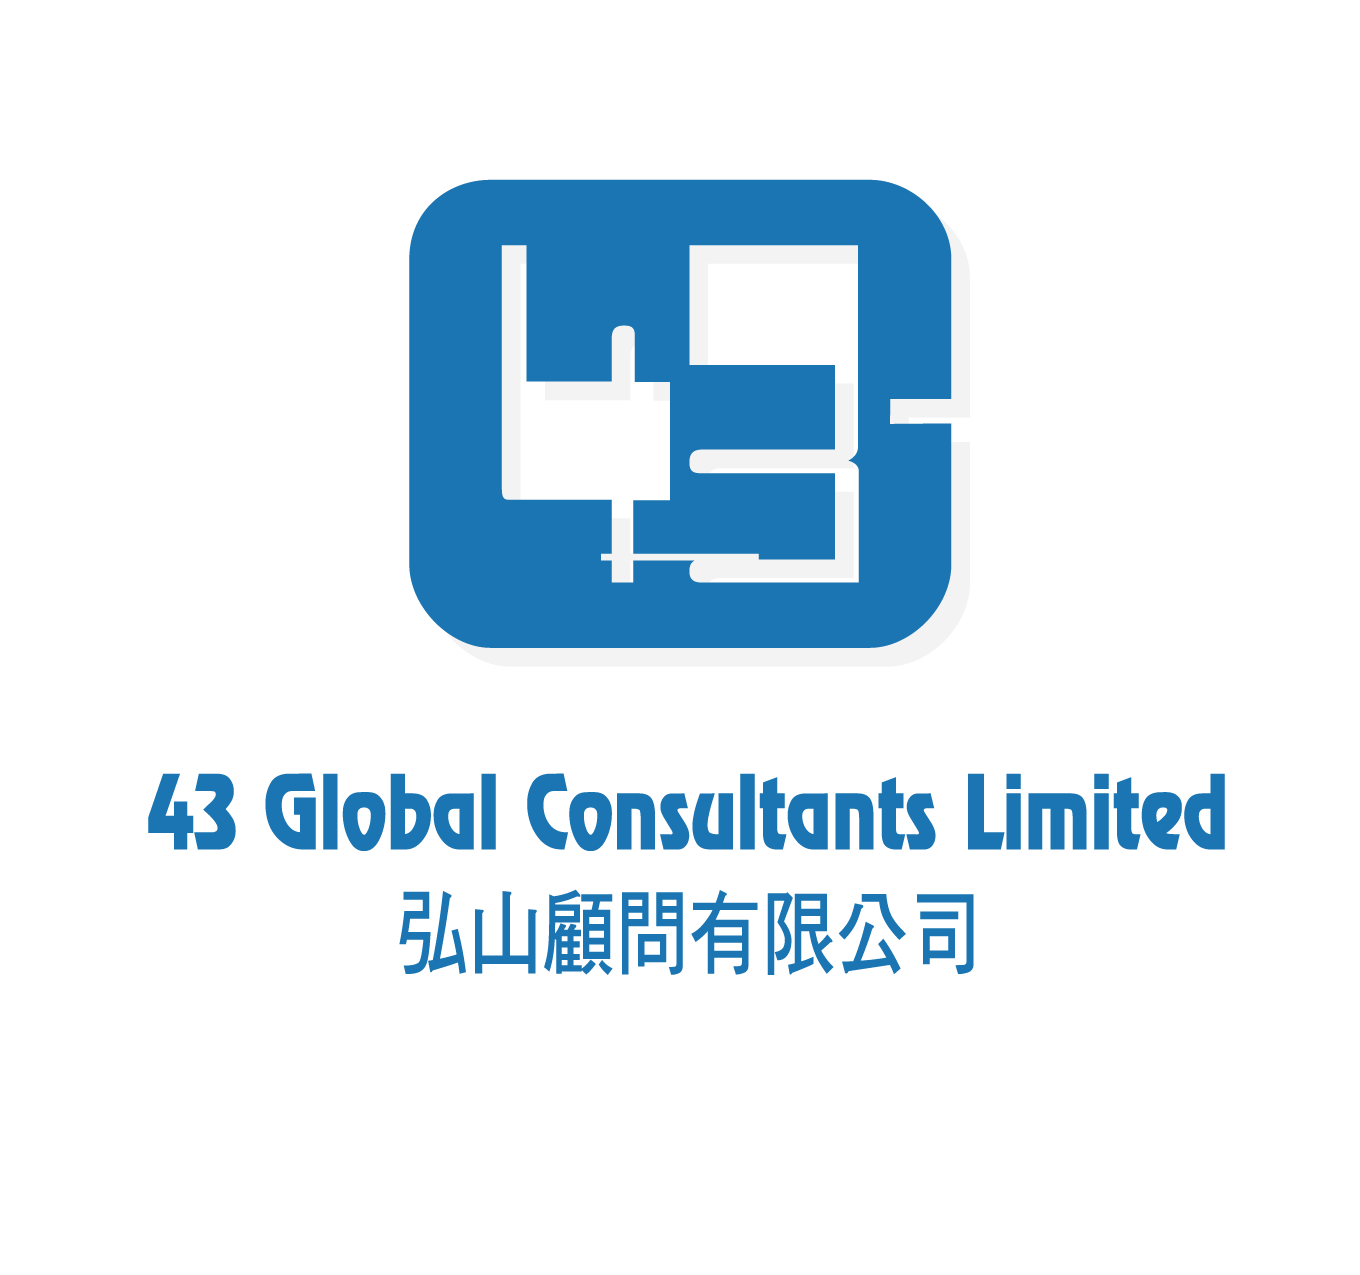 43 Global Consultants Limited